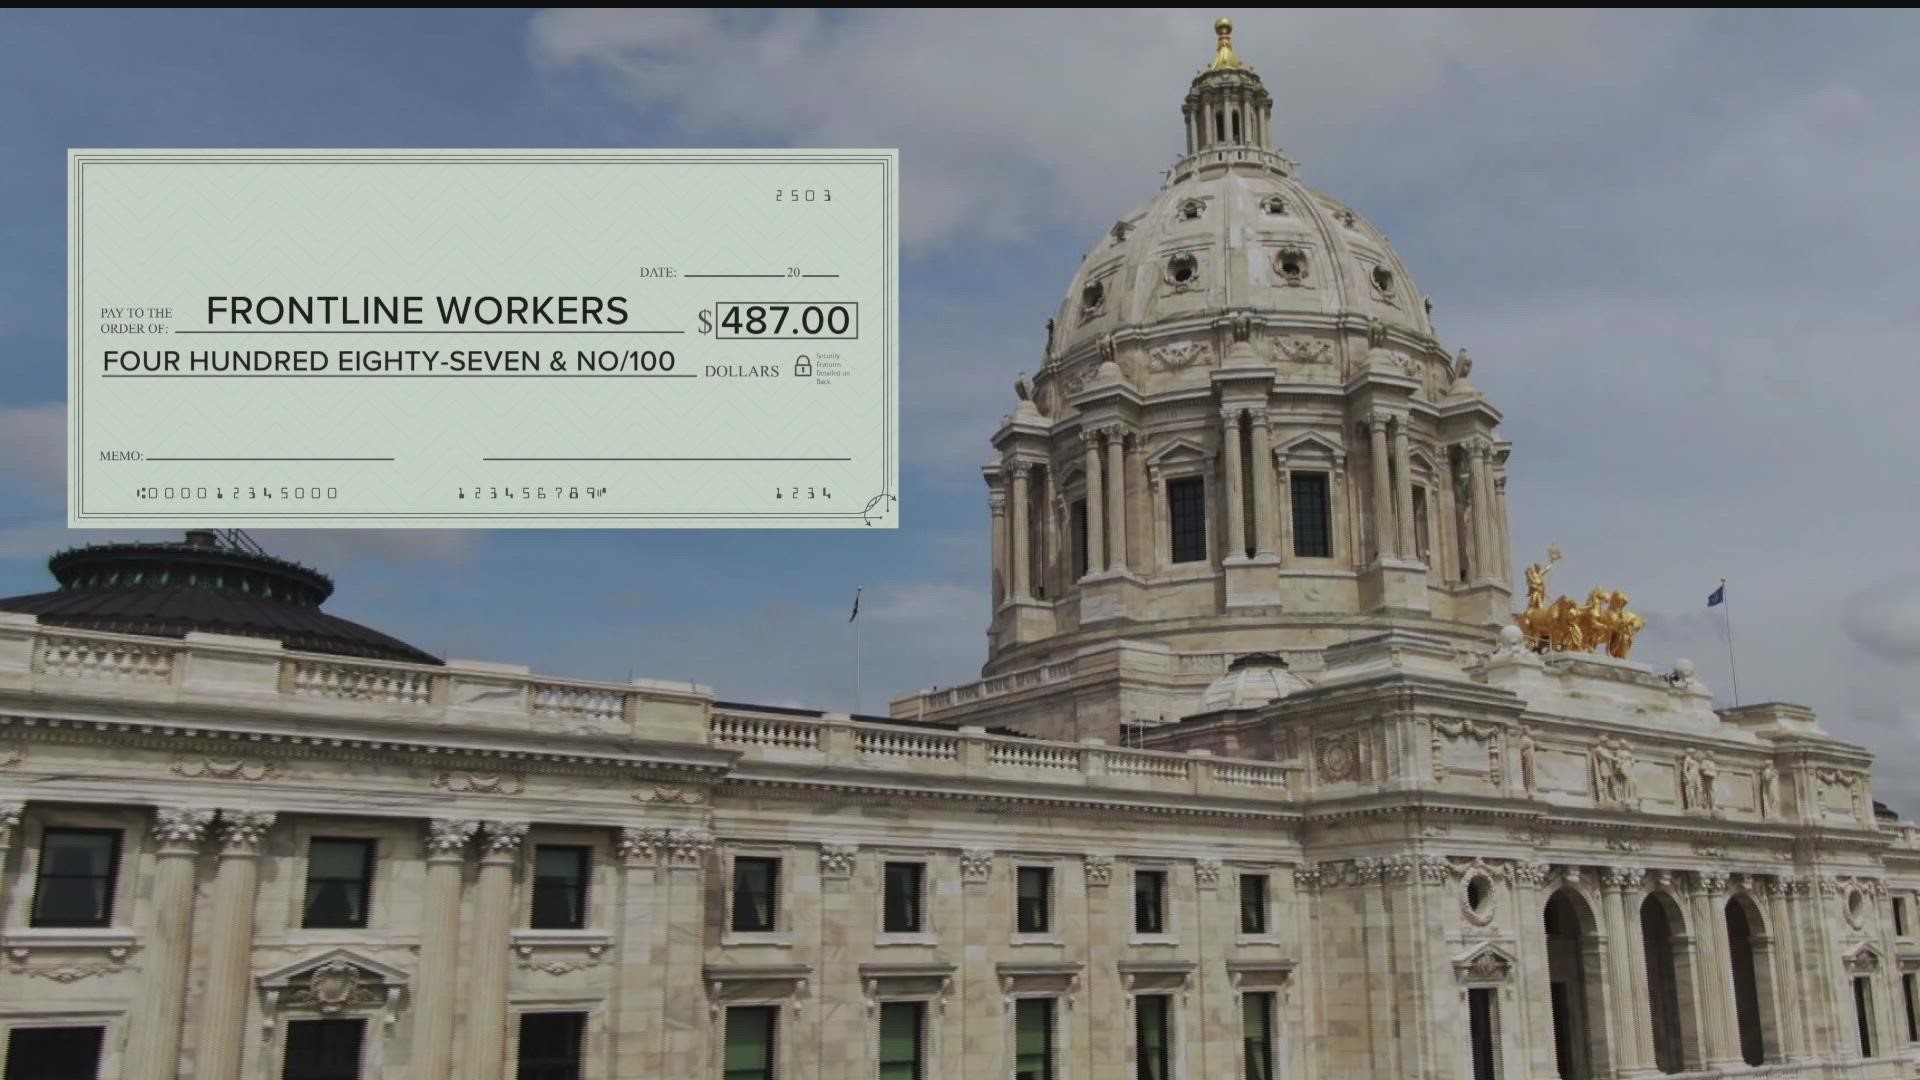 Gov. Tim Walz said Monday that 1,025,655 people were approved to receive the bonus for working on the front lines through COVID, and will split $500 million.